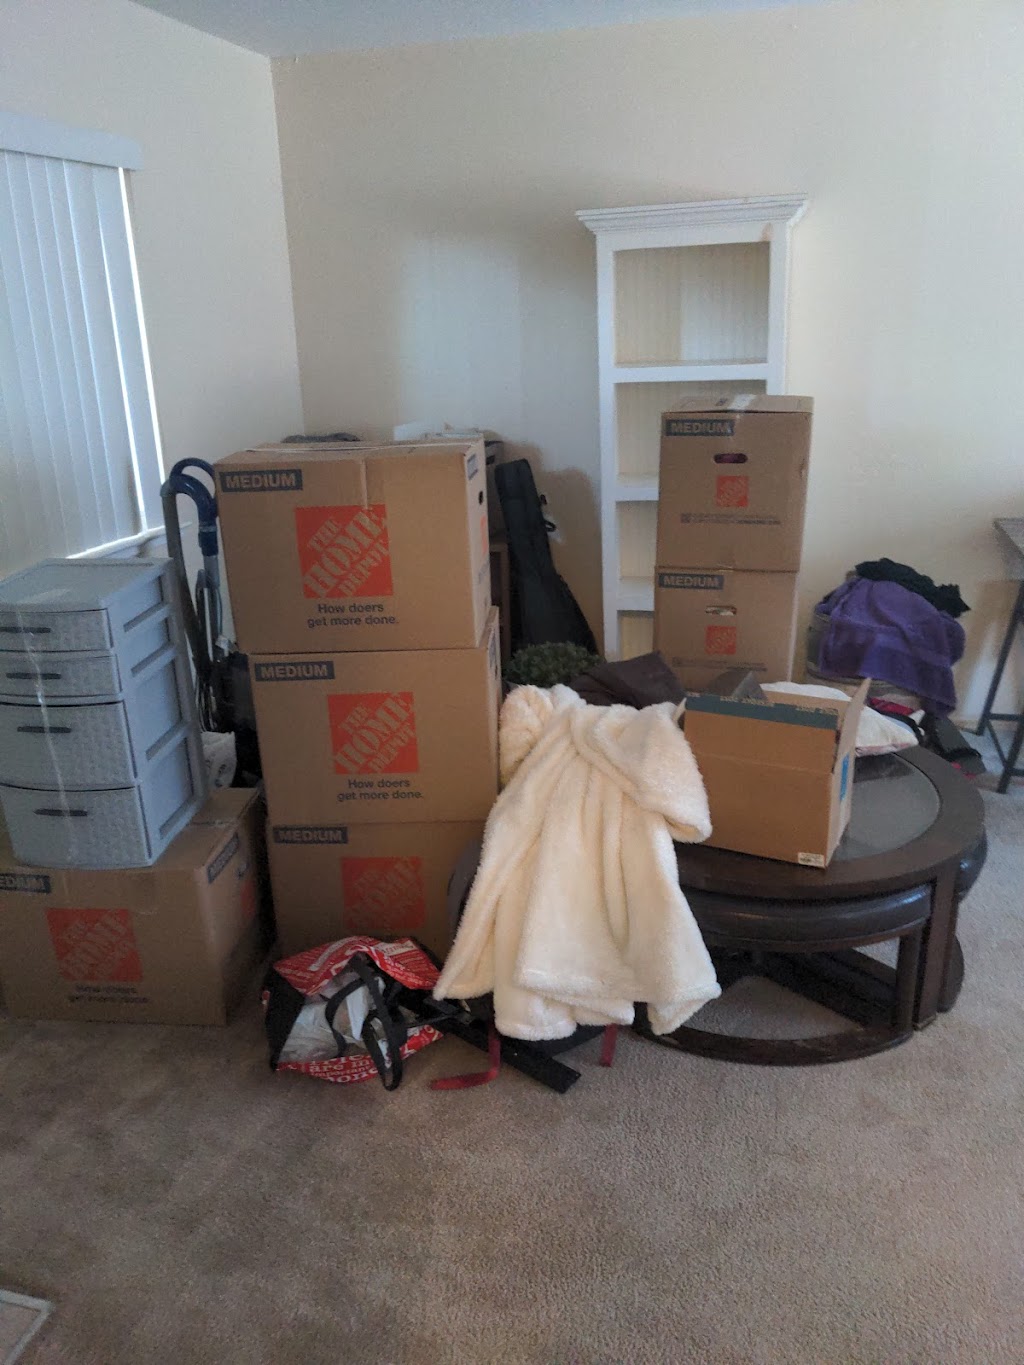 Everything Goes Movers | 2297 Peachtree Ln, San Jose, CA 95128, USA | Phone: (408) 580-6096